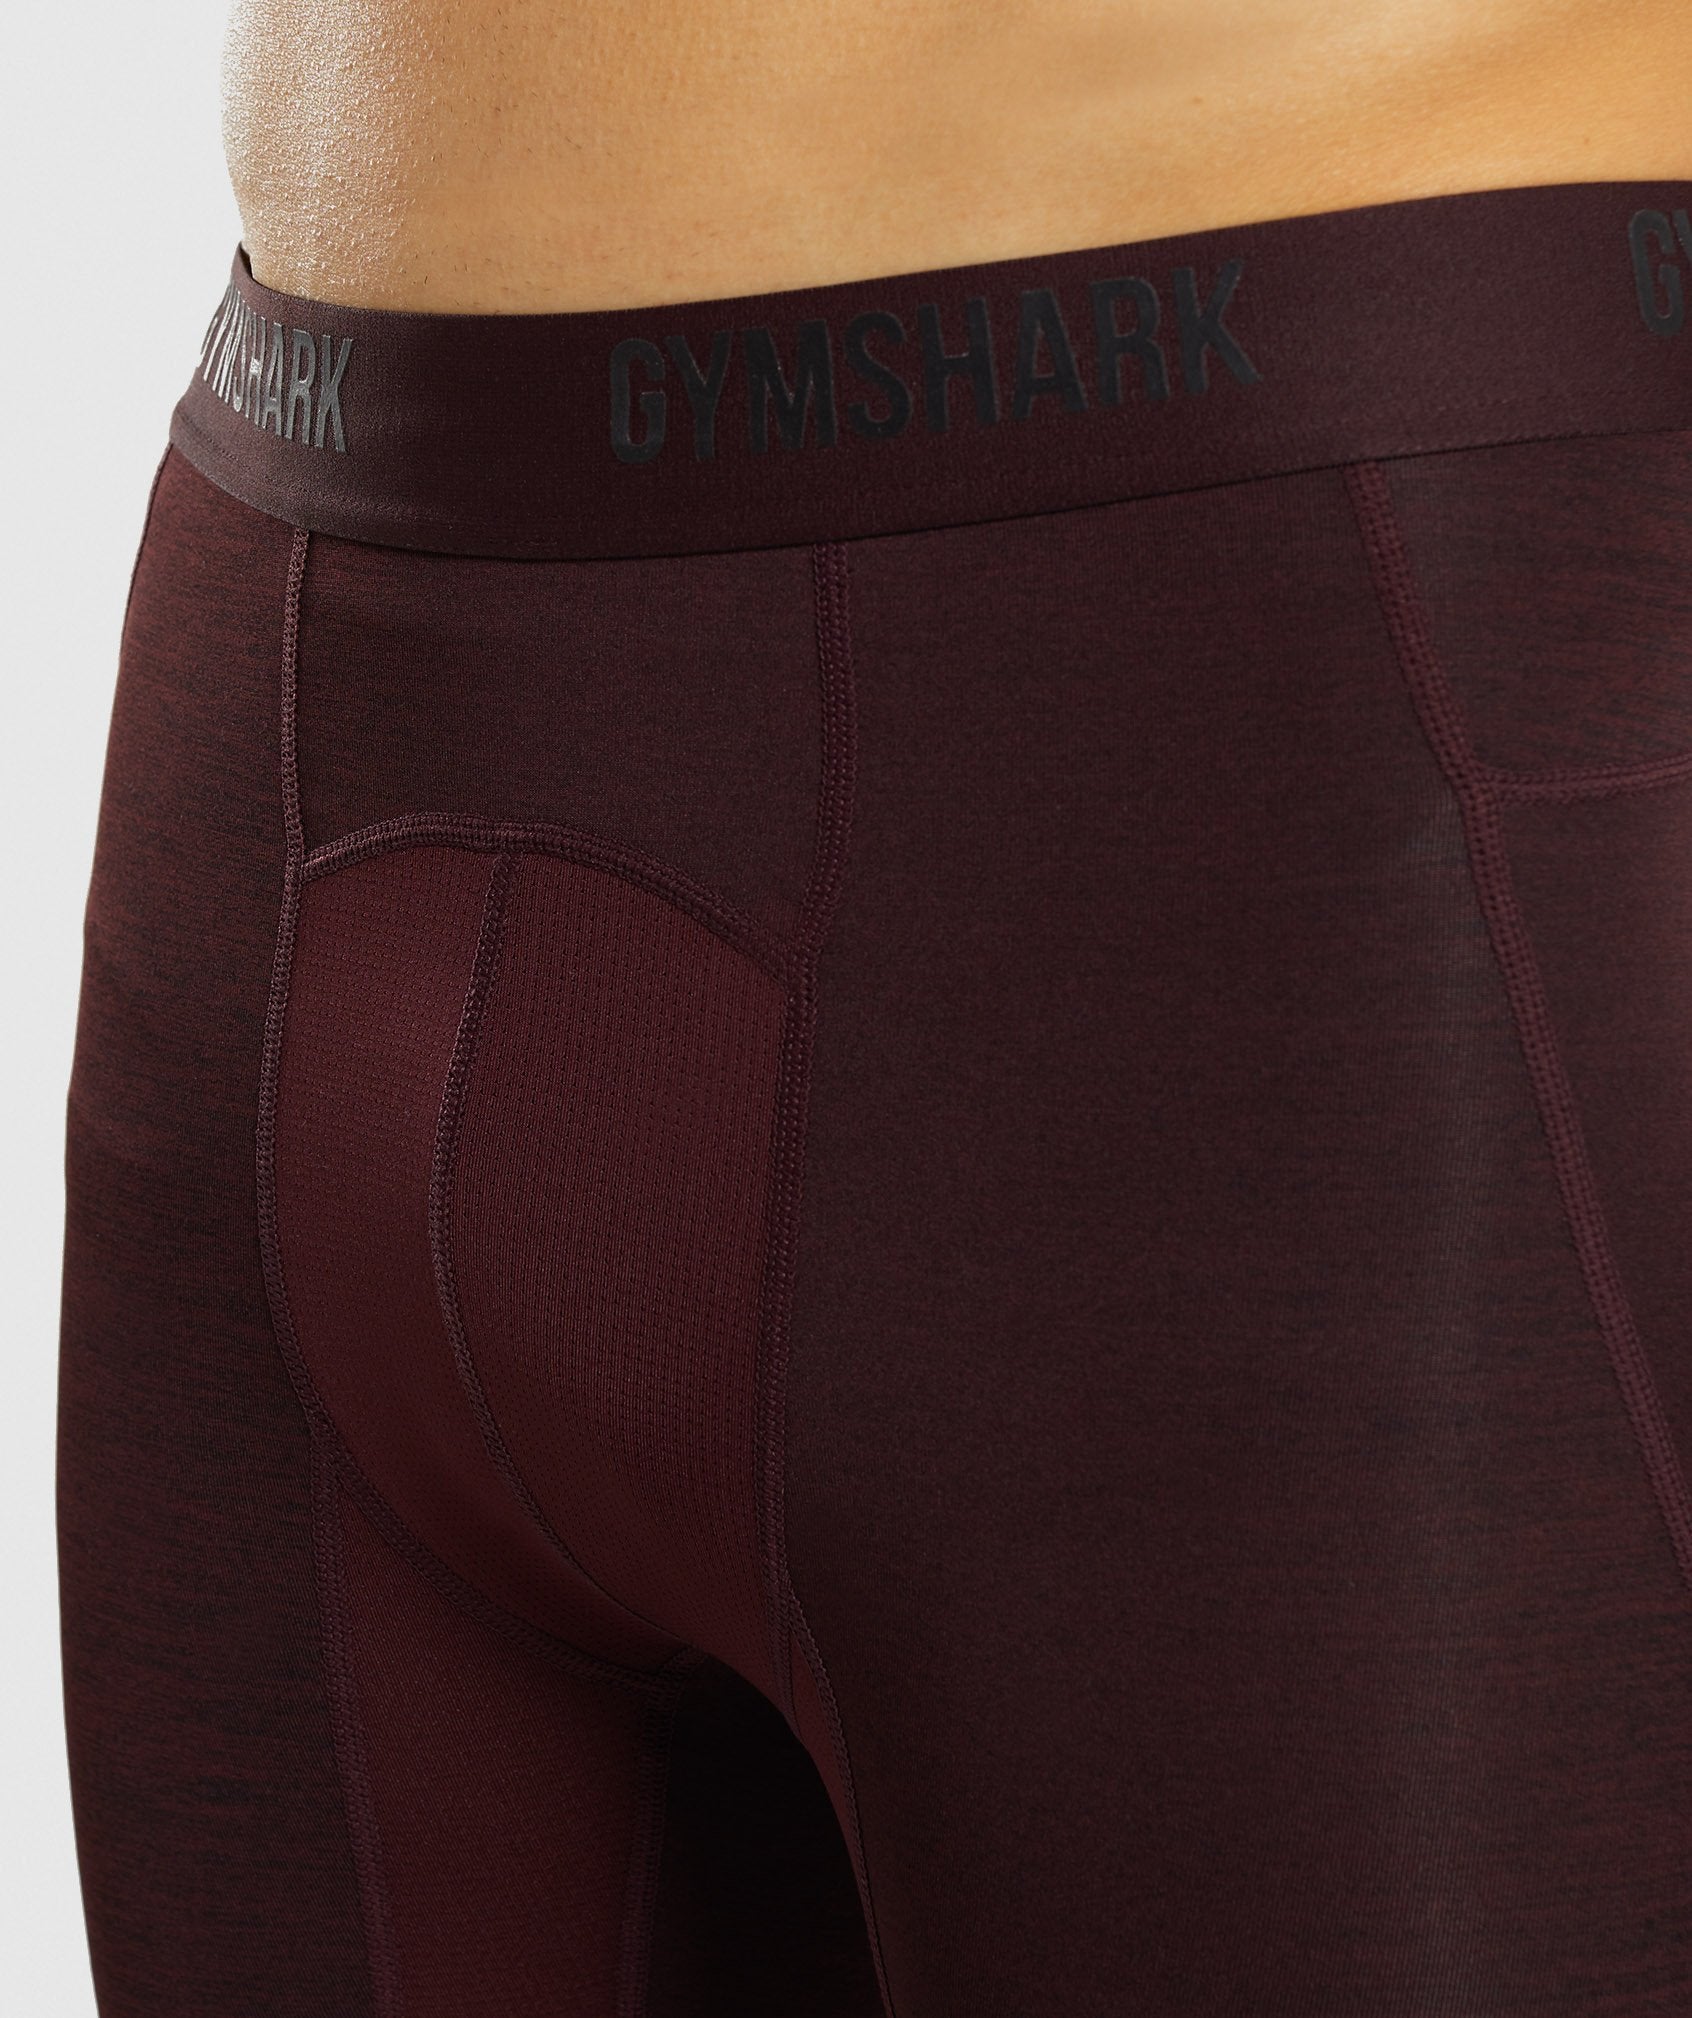 Element+ Baselayer Shorts in Ox Red Marl - view 6